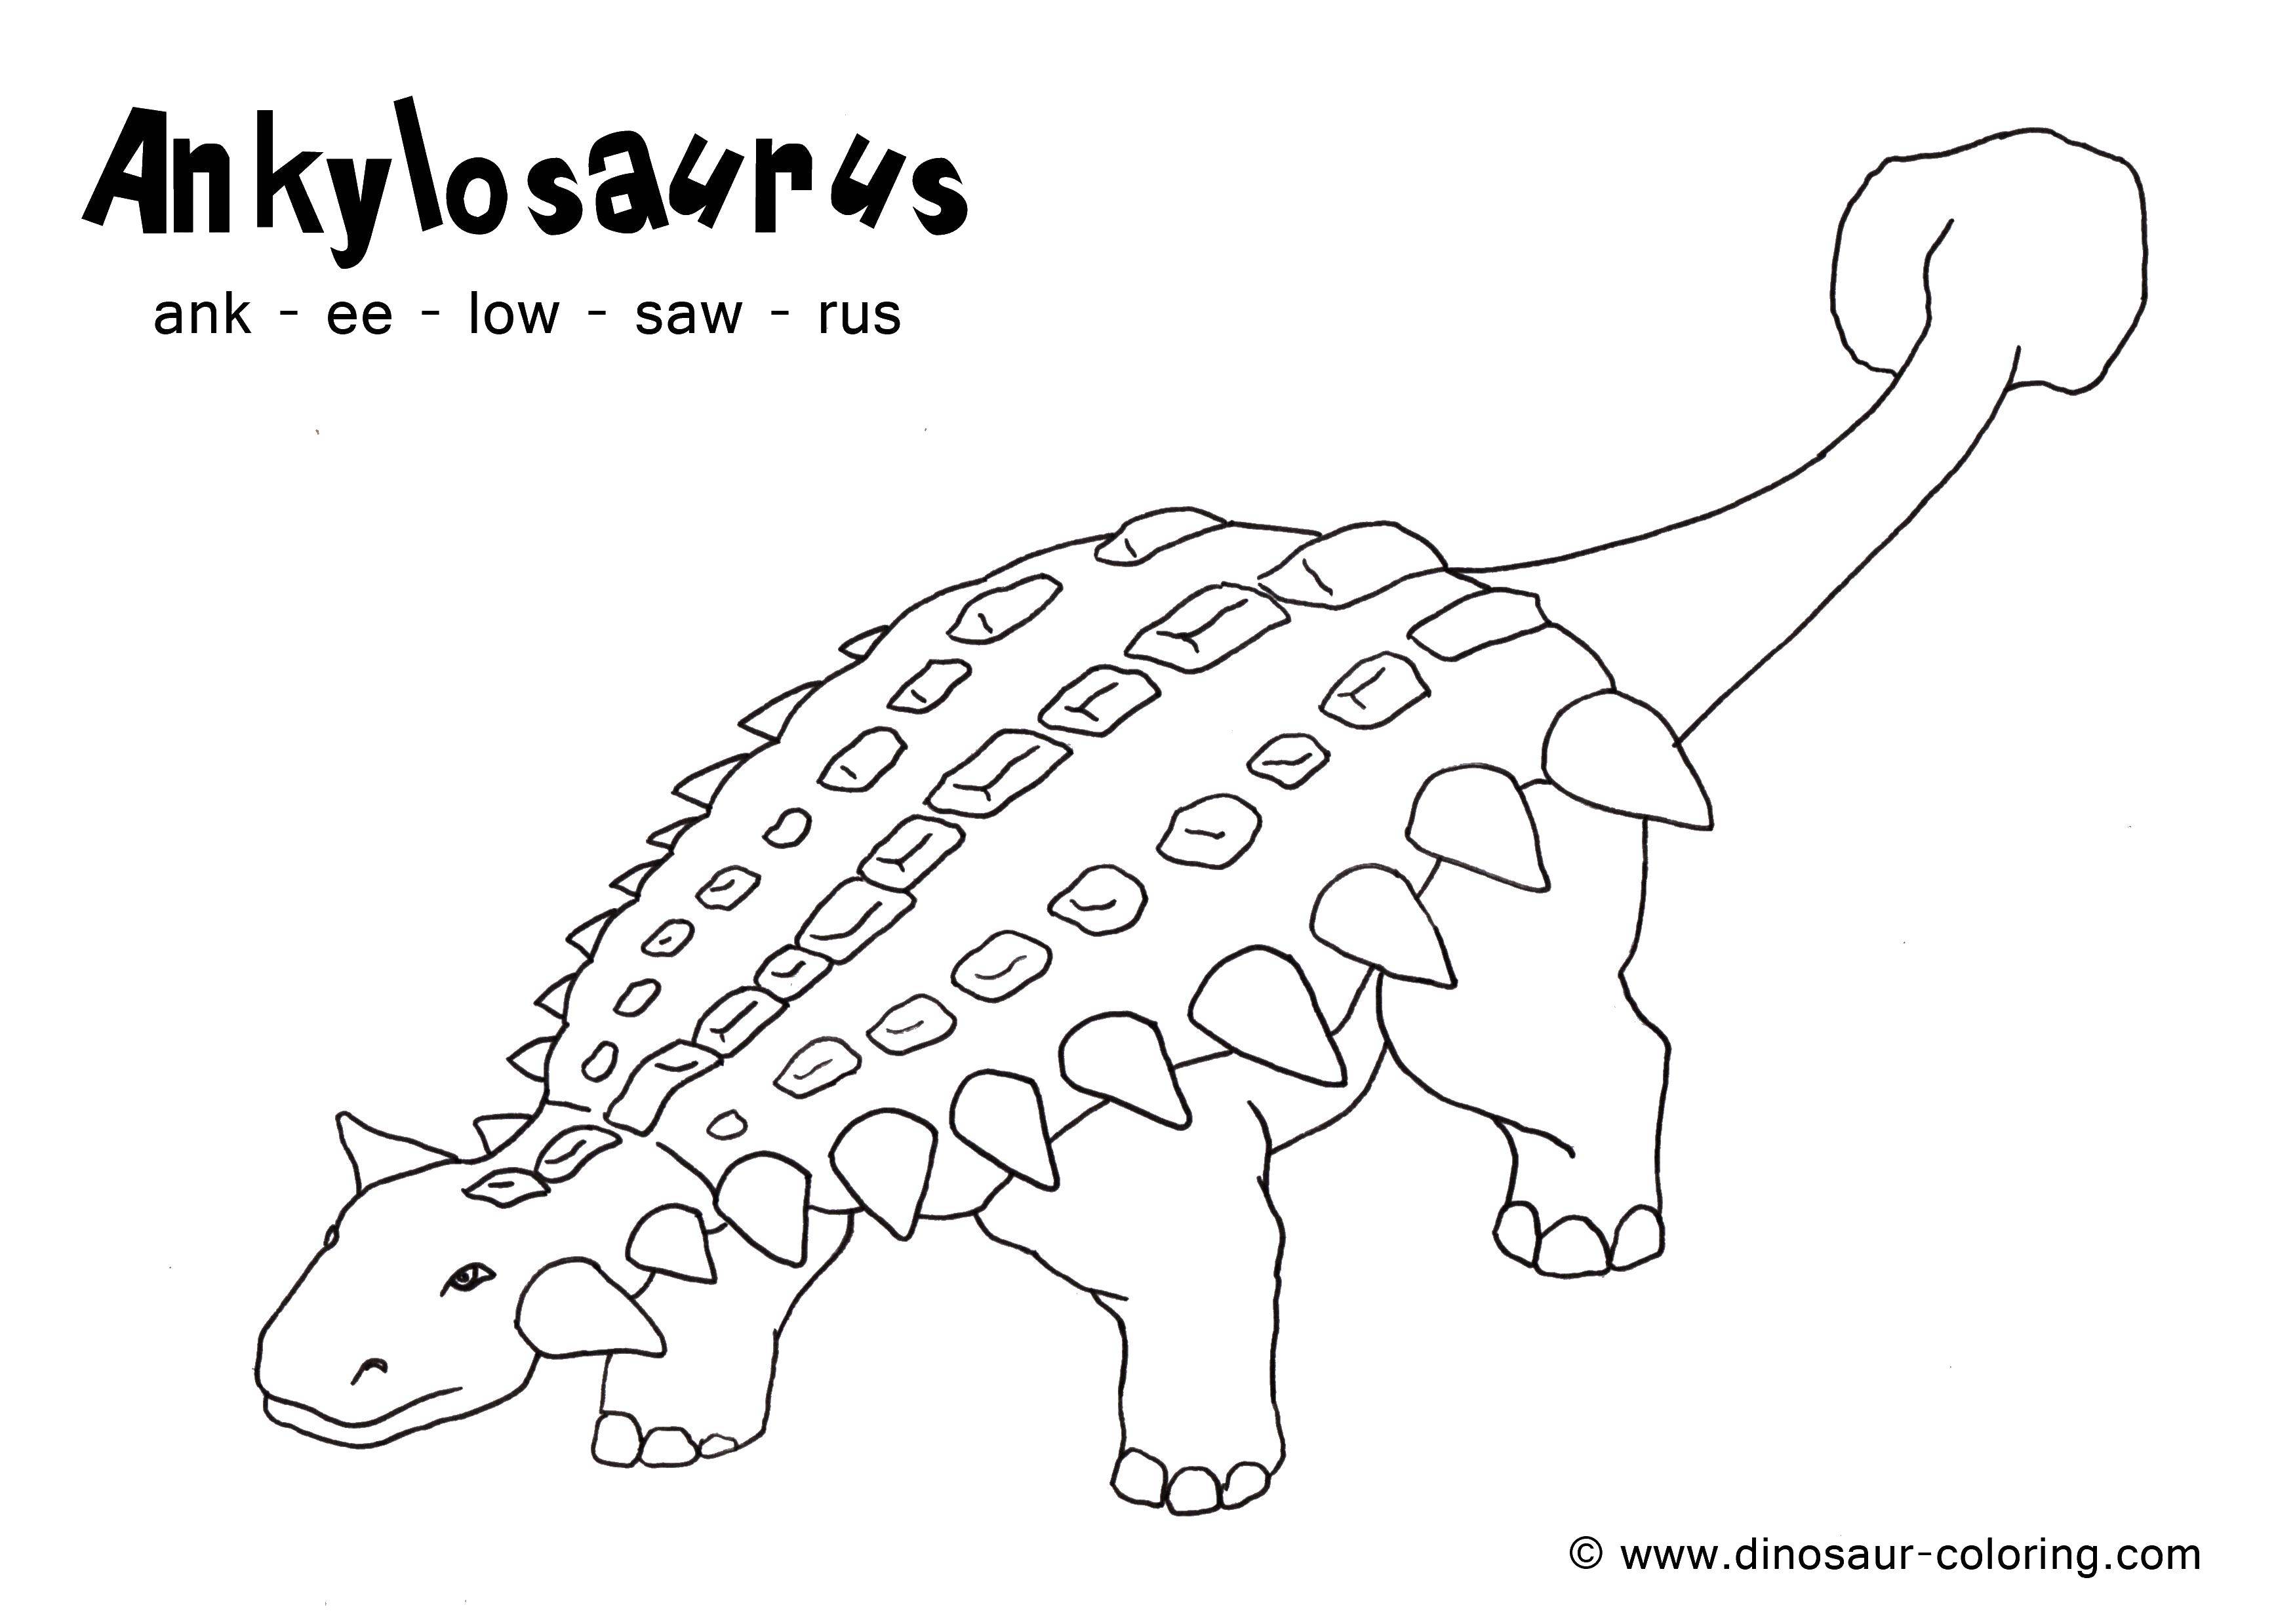 Coloring Ankylosaurus with spikes. Category Jurassic Park. Tags:  Dinosaurs.